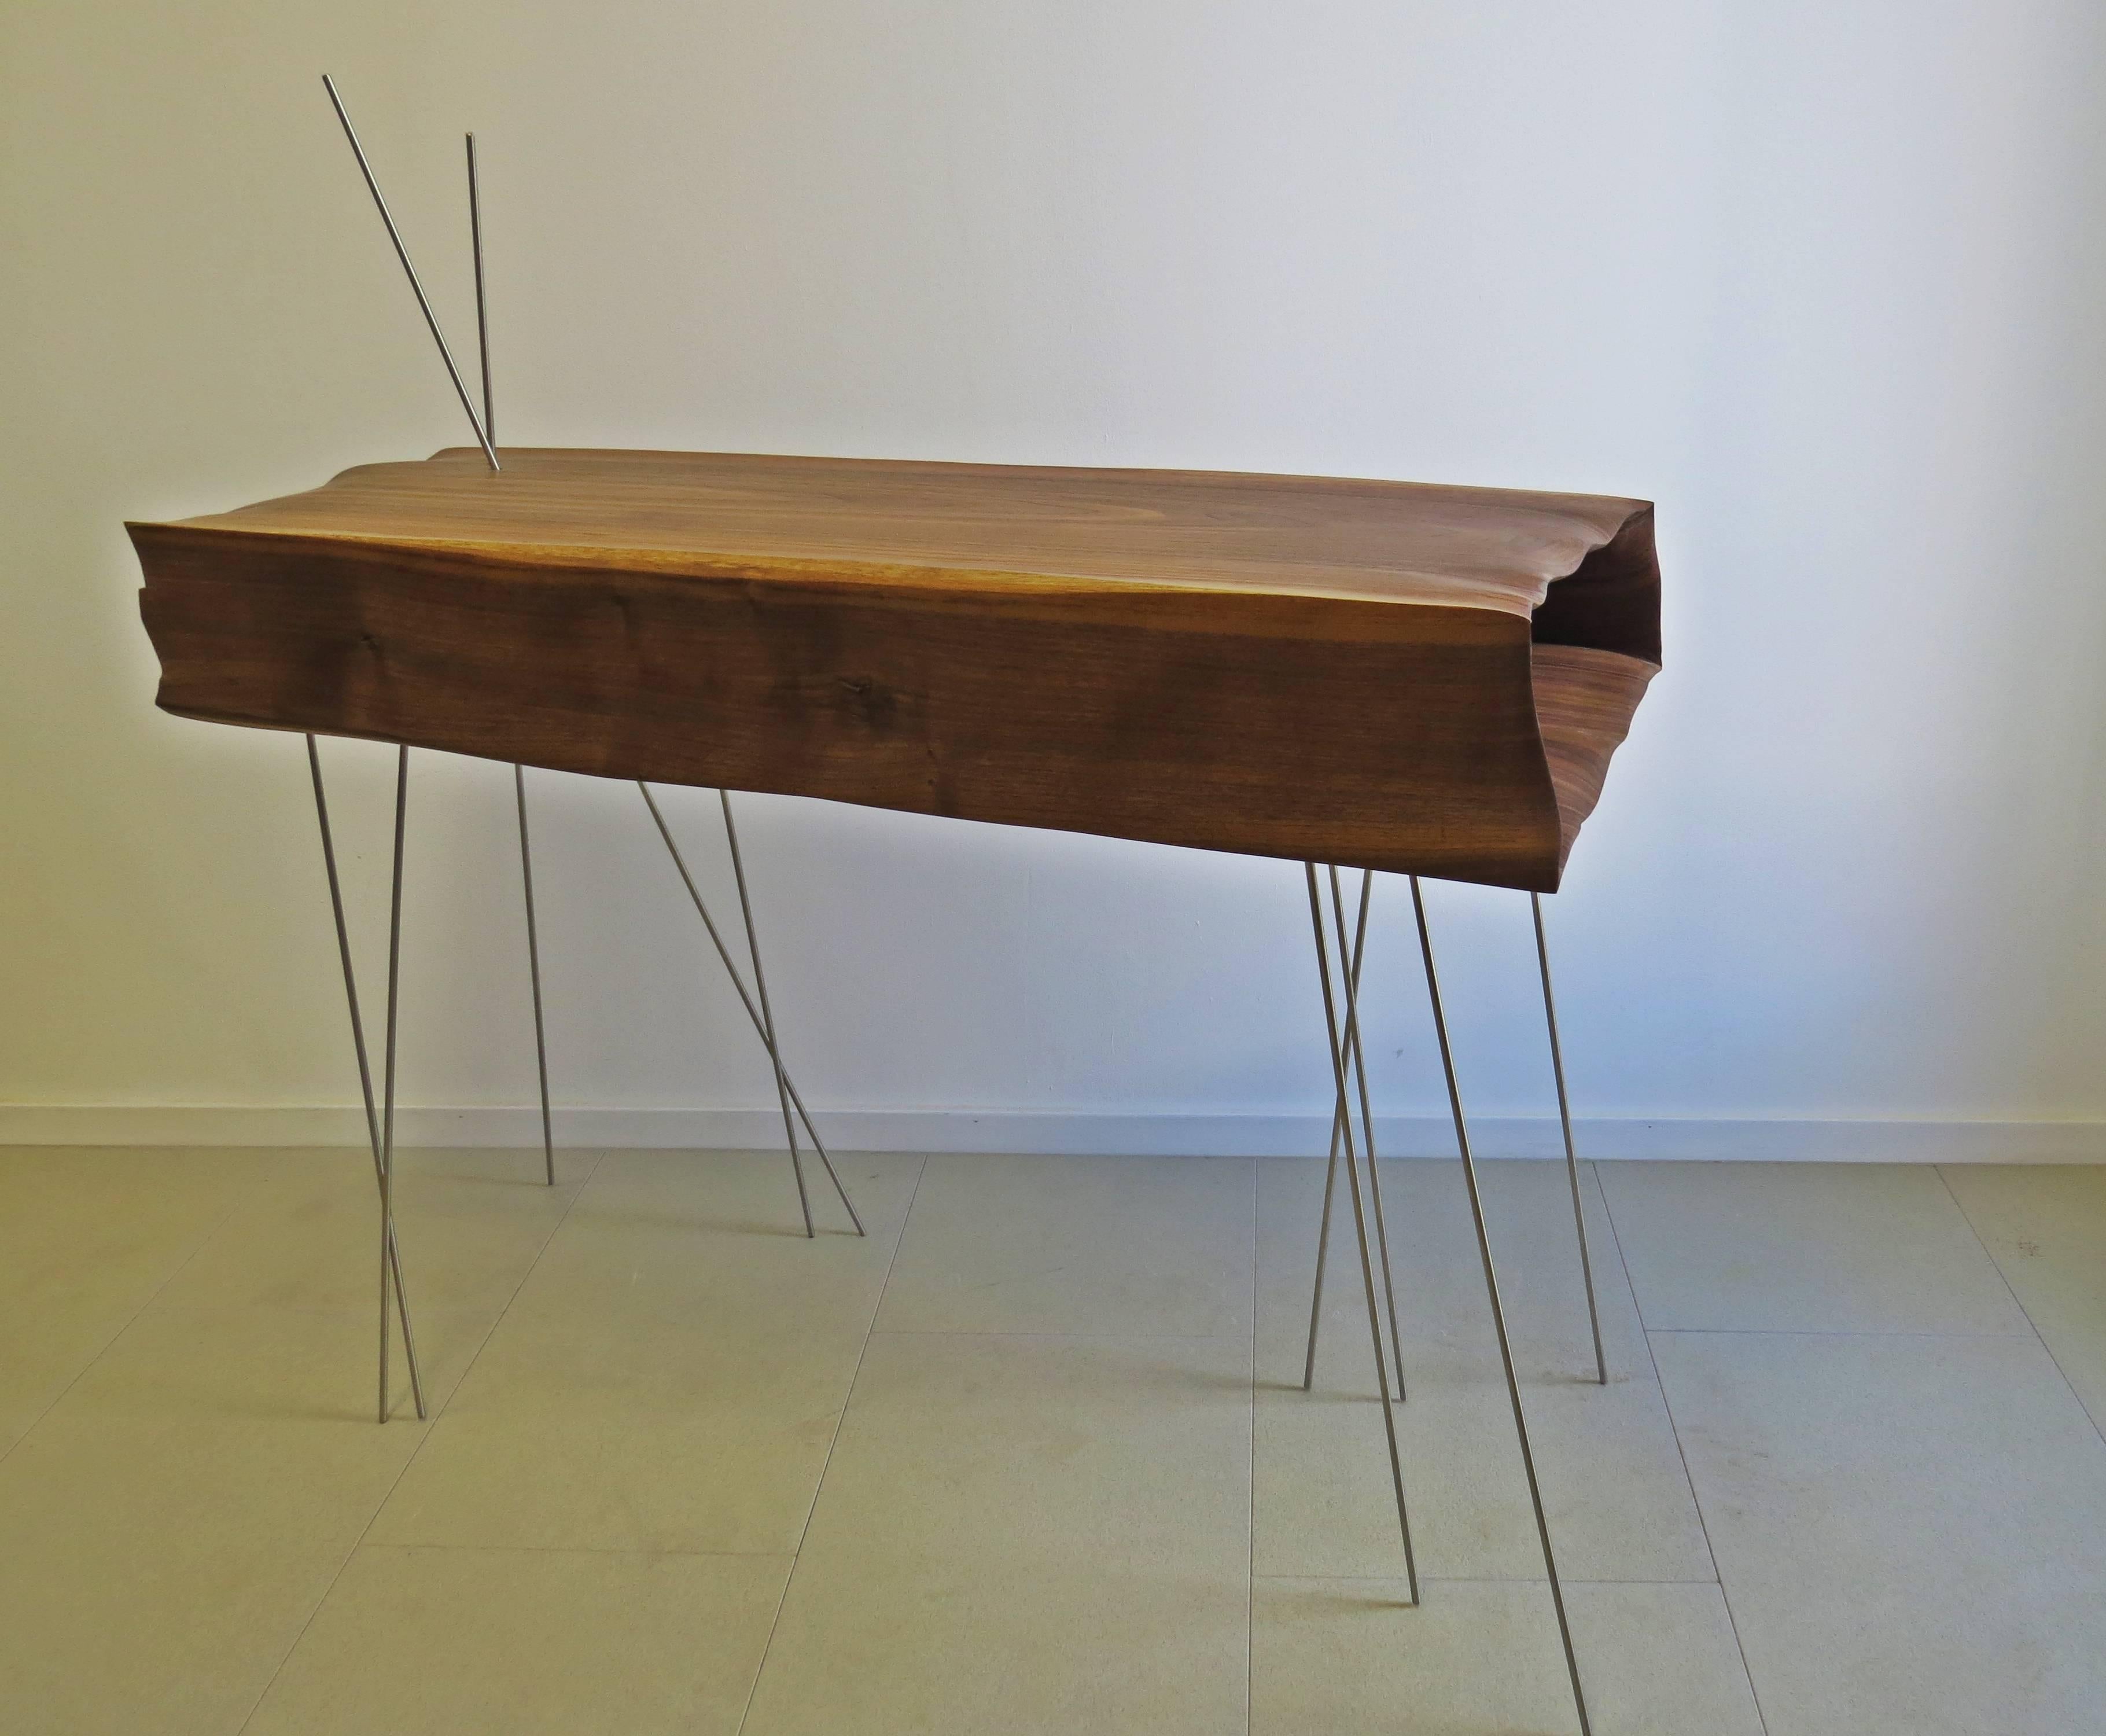 Console more sculpture like furniture.
The organically shaped hollow body is floating.
The wood is sculpted with folds and creases.
The thin stainless steel rods complete the overall picture and serve as legs.

Of course handmade, each part